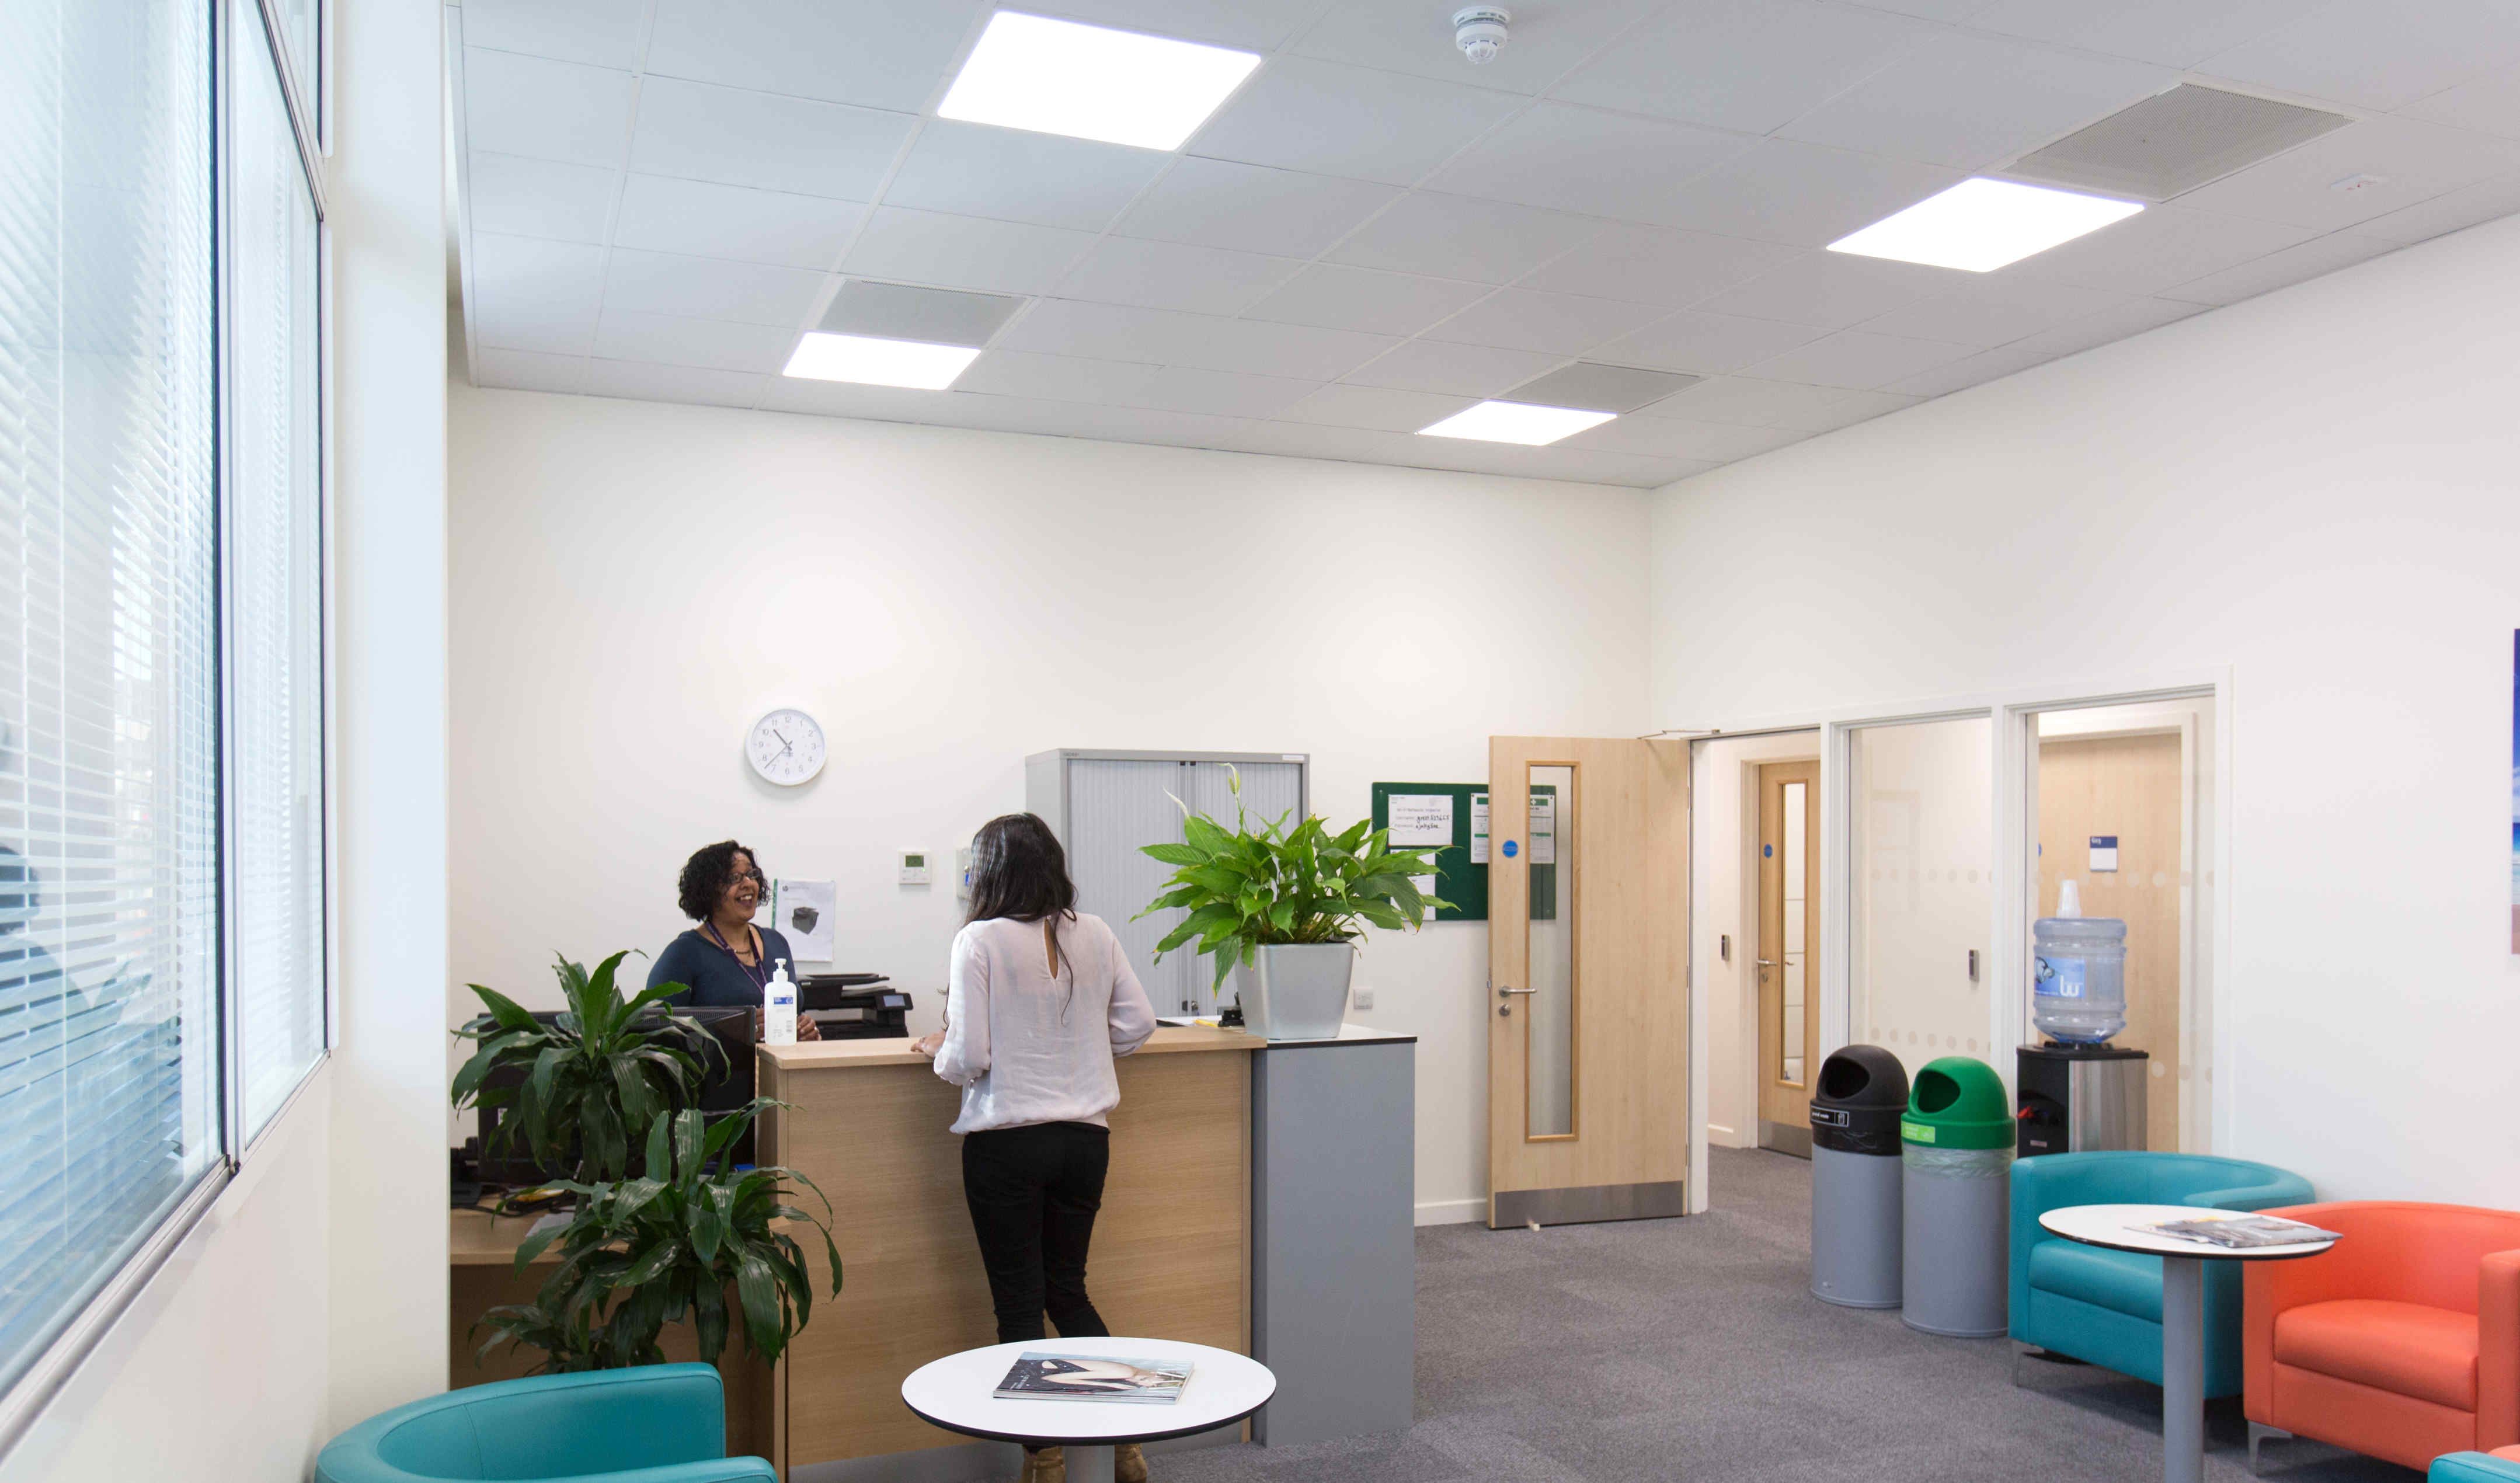 Reception area at the Imperial NEA Research Hub at Stadium House